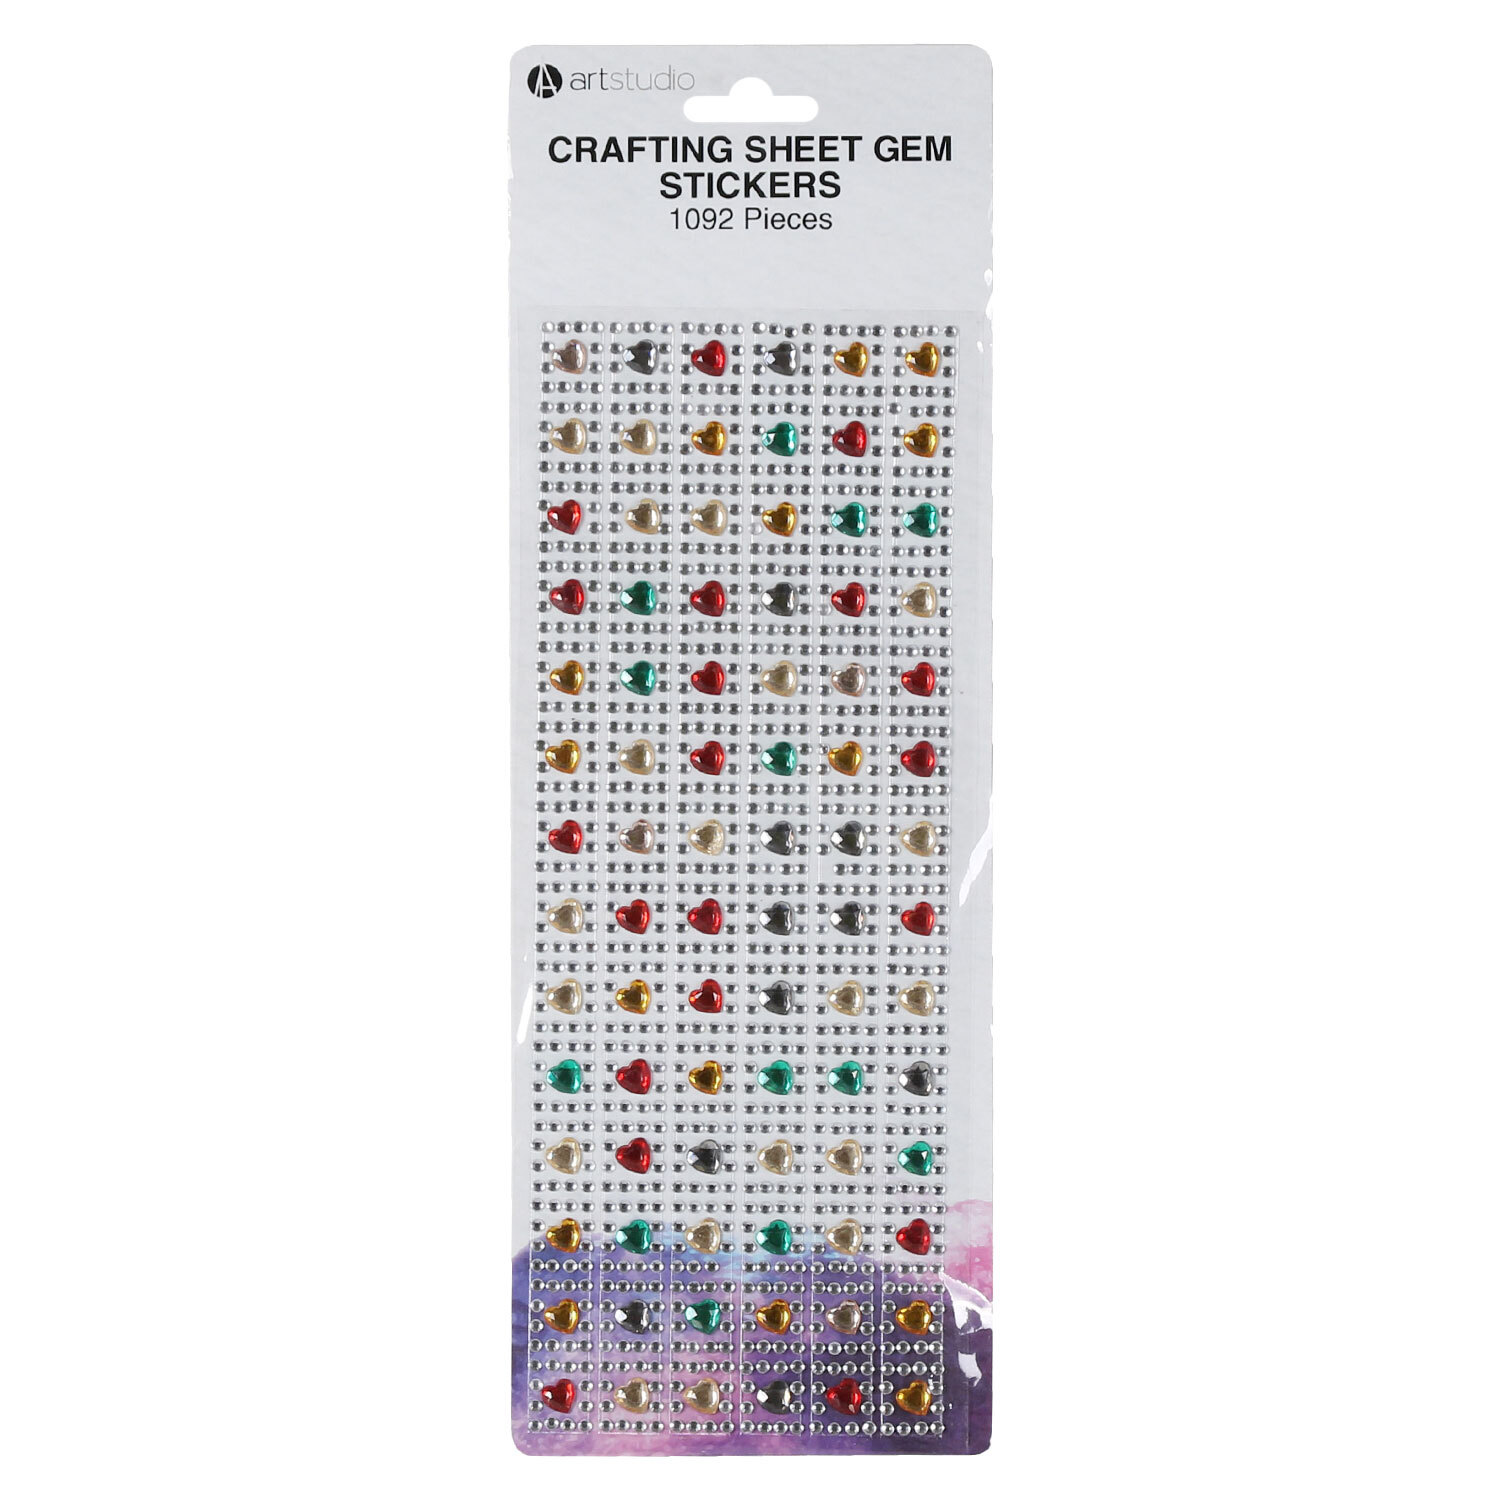 Pack of 1092 Crafting Sheet Gem Stickers Image